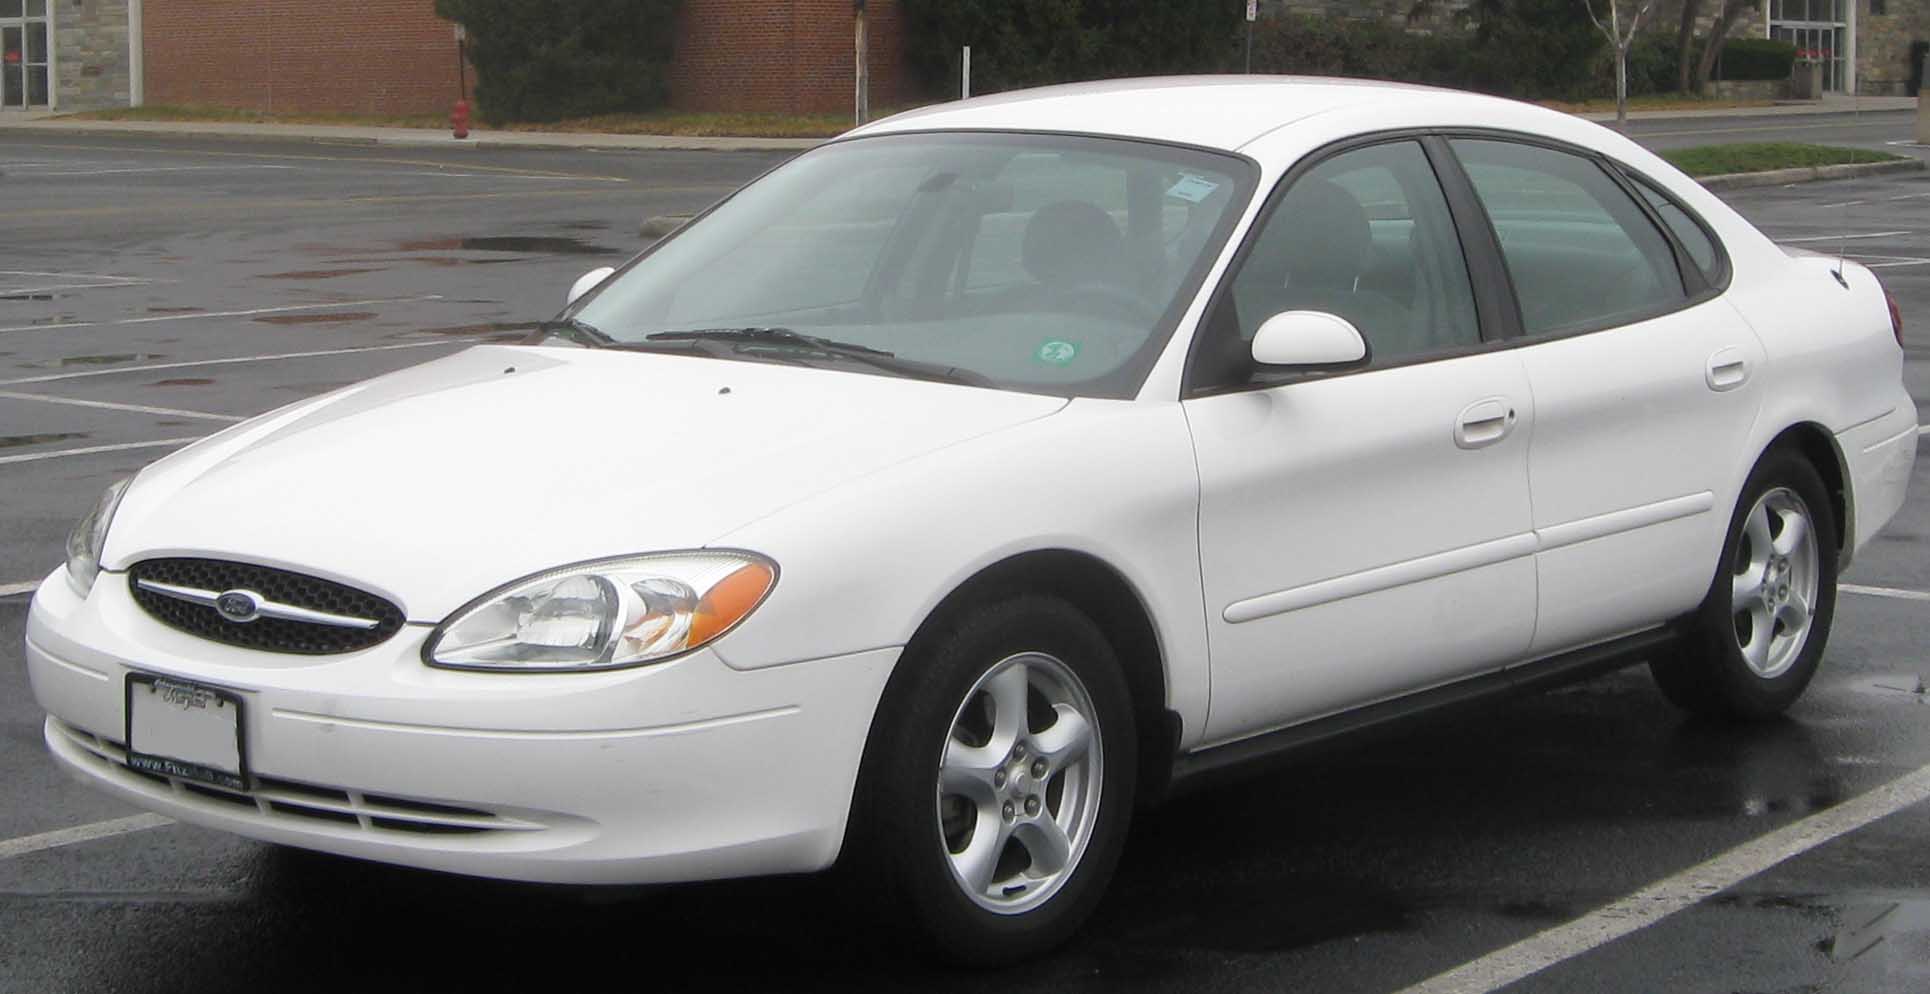 2003 Ford taurus special edition